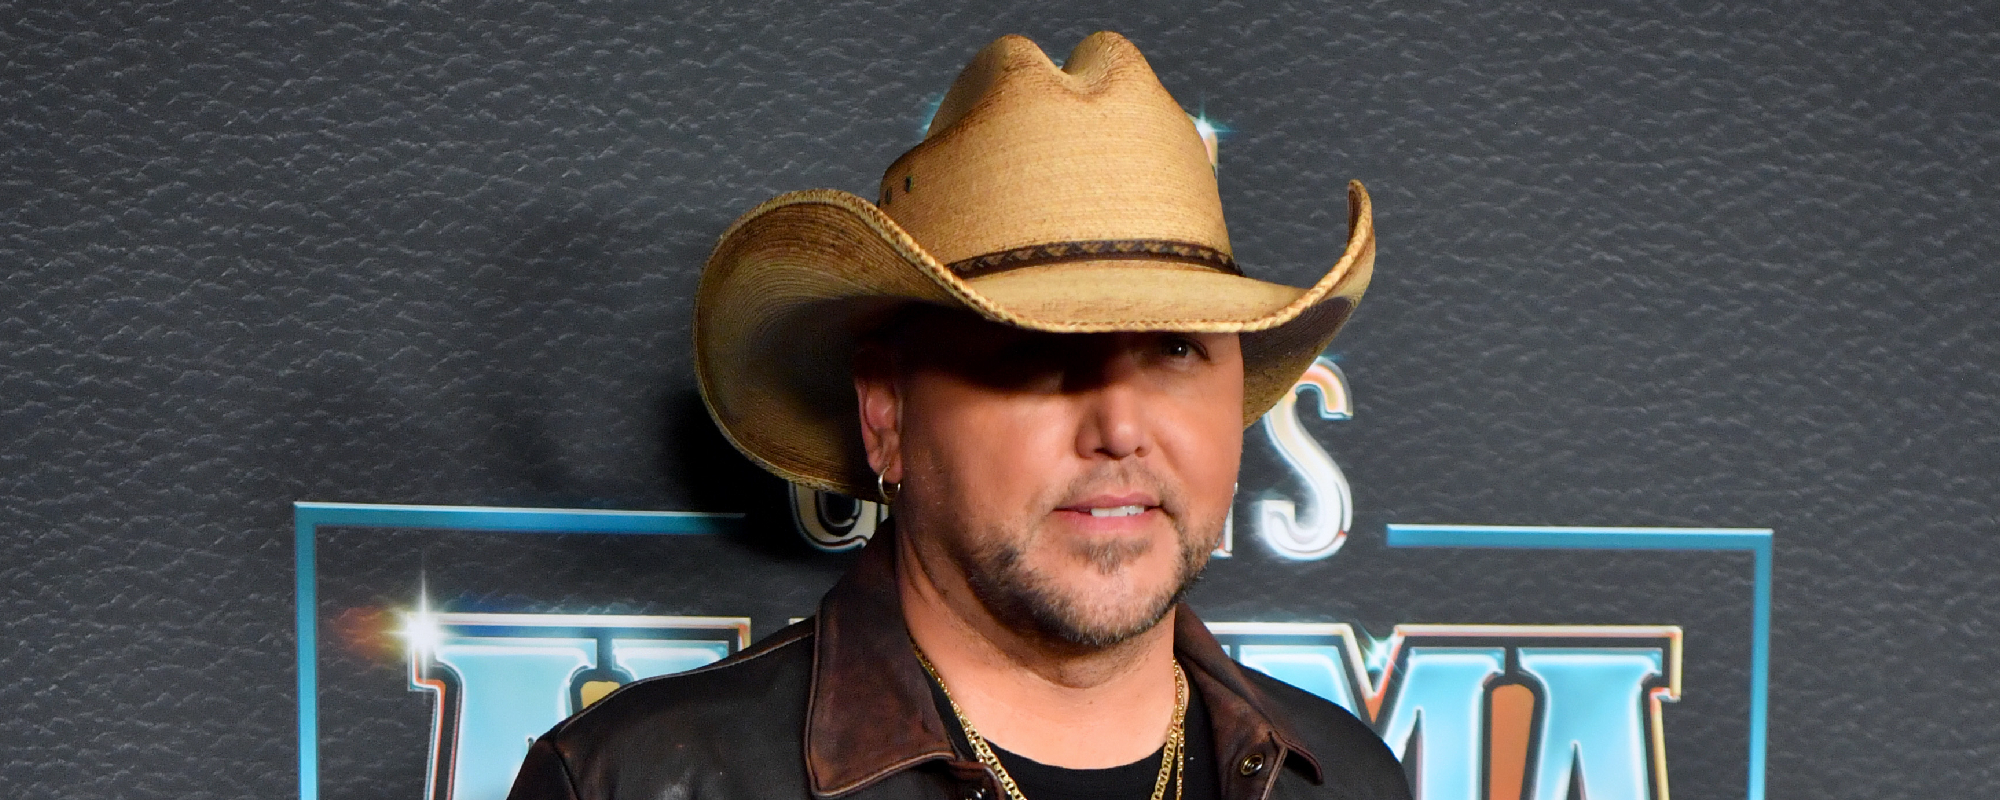 Jason Aldean Opens Up About Backlash He Received From Country Music and Dealing with Online Hate